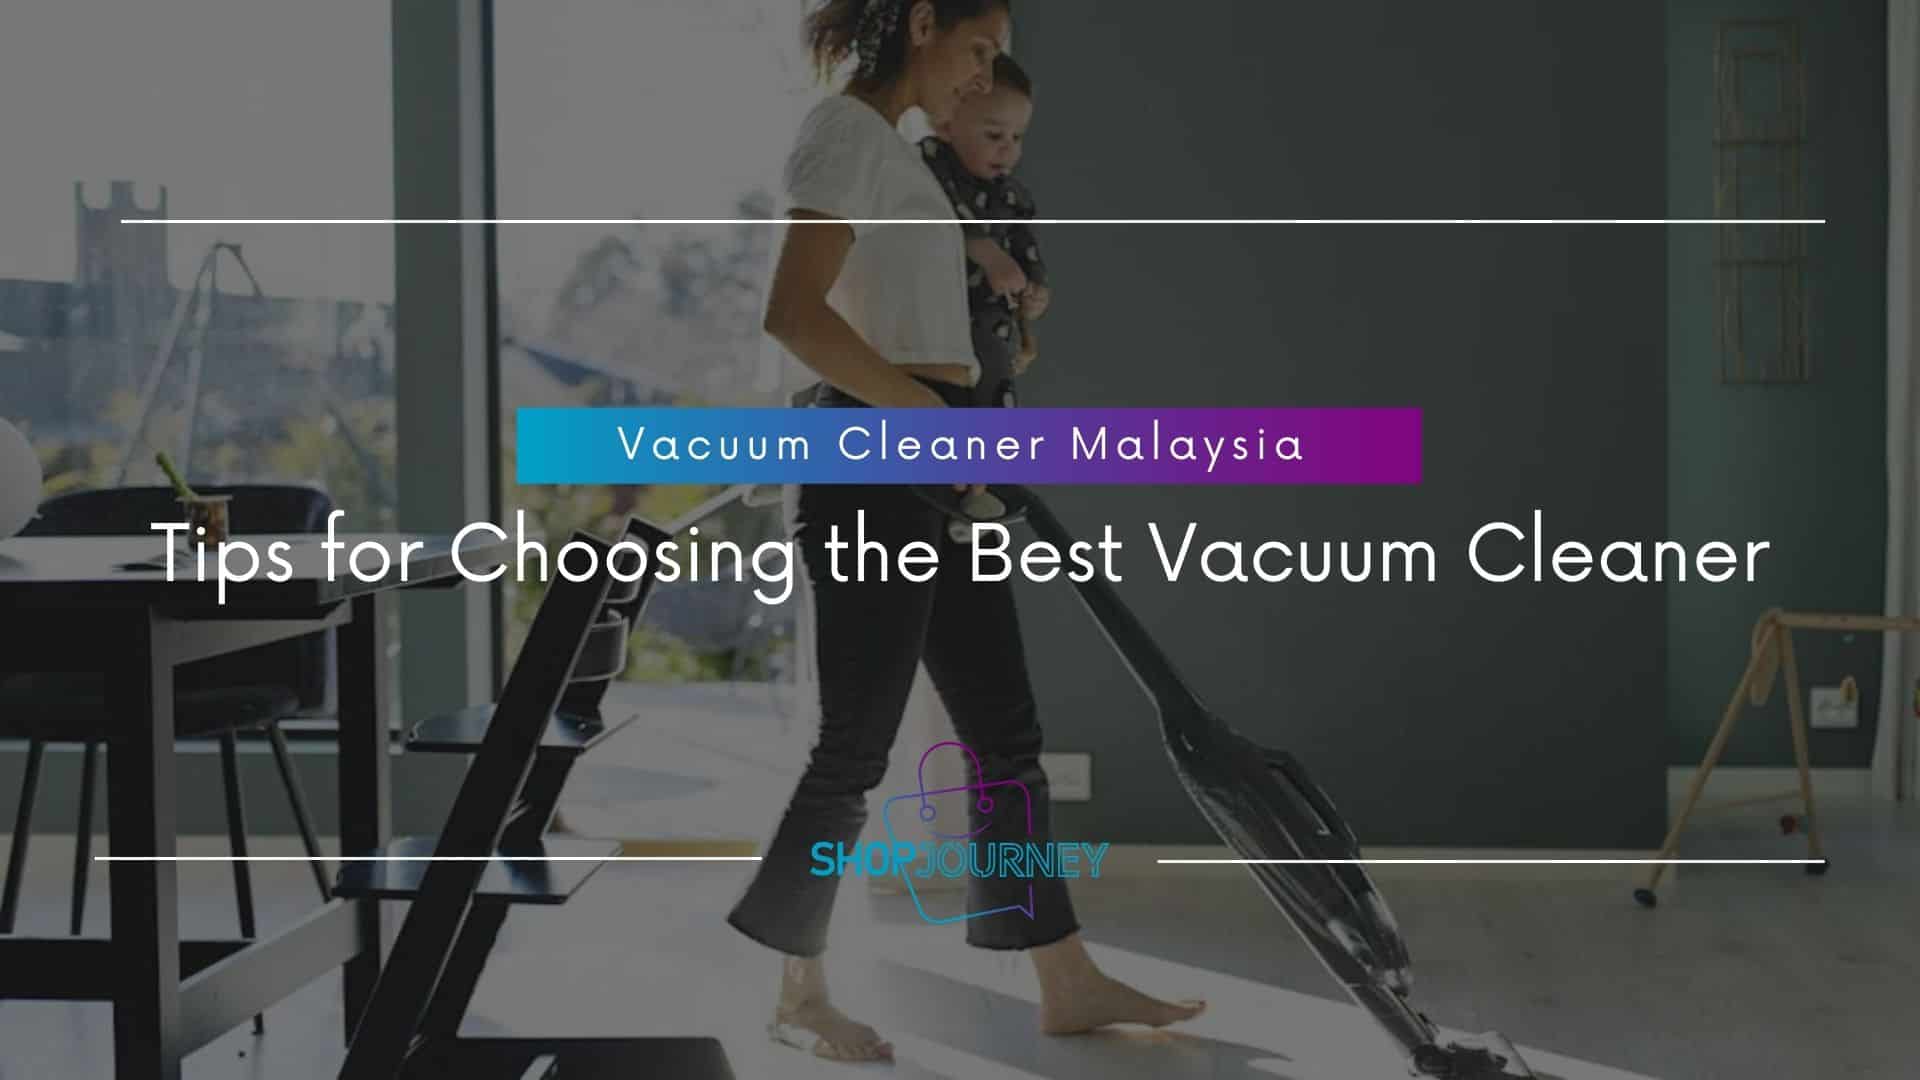 Tips for choosing the top vacuum cleaner.